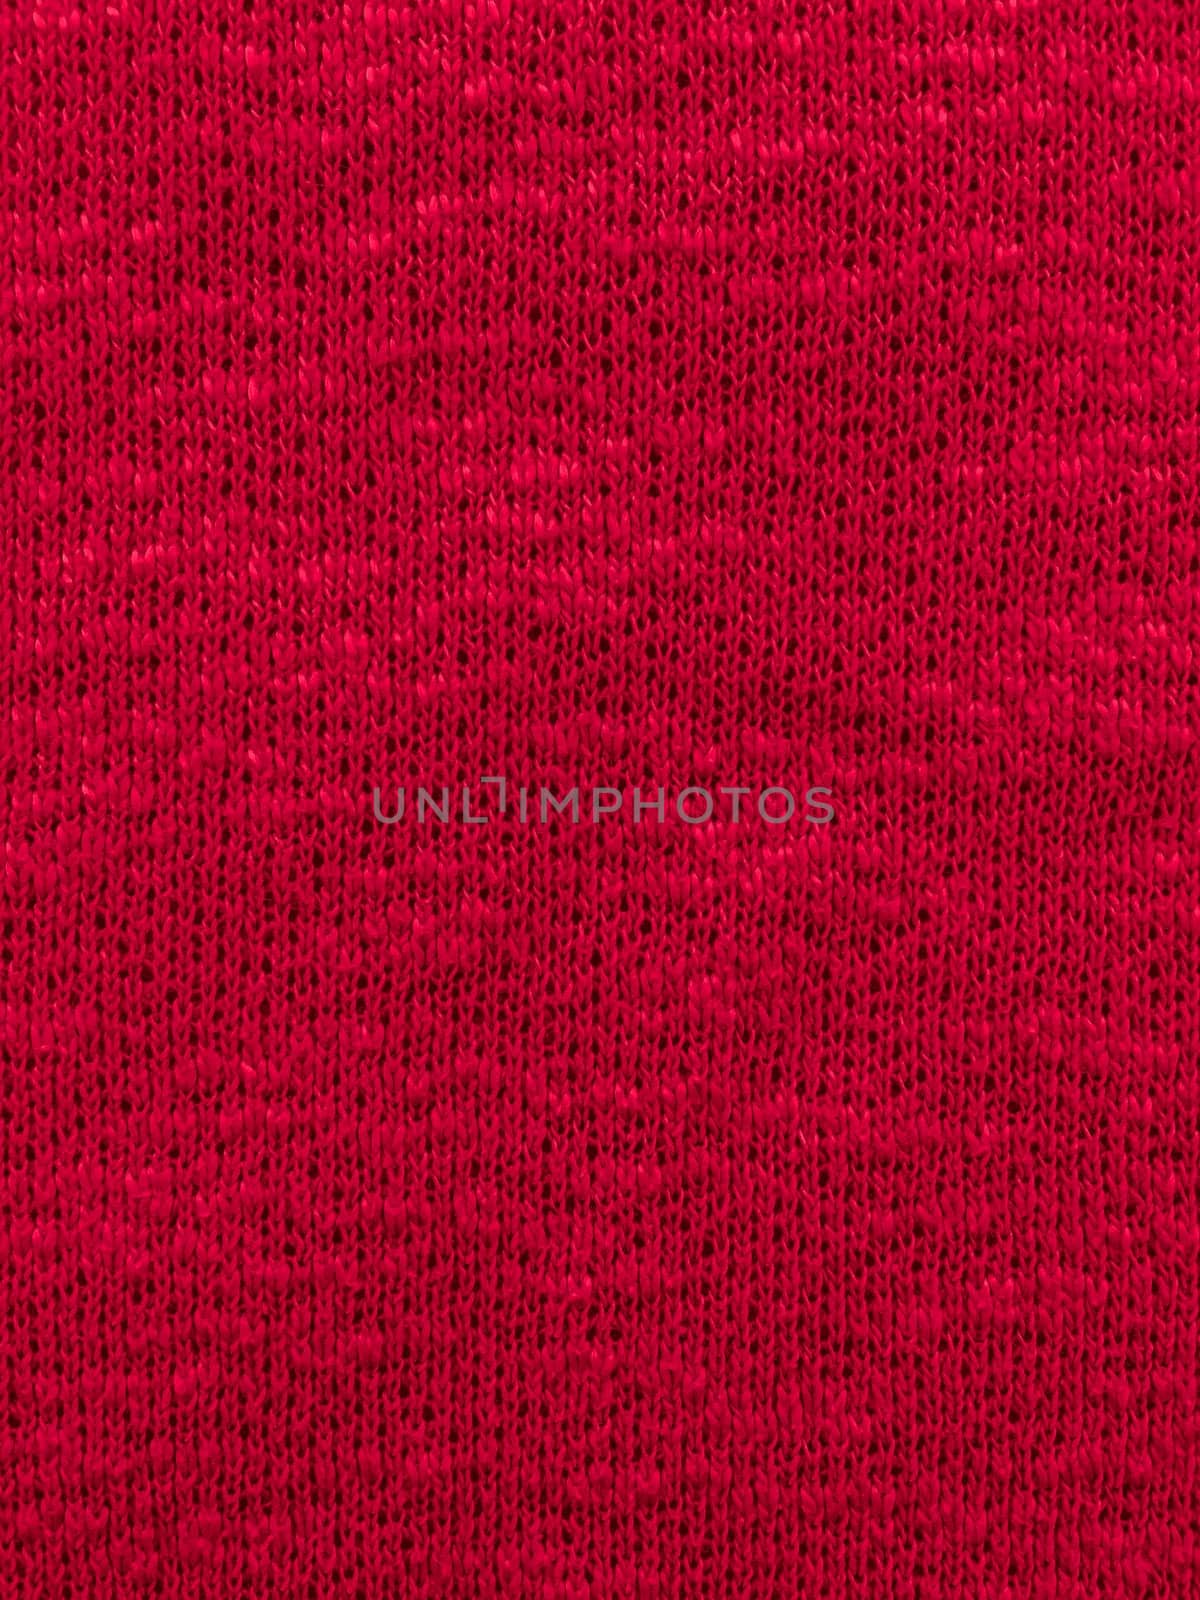 Christmas Knitted Texture. Organic Woven Design. Linen Jacquard Thread Embroidery. Xmas Knitted Background. Vintage Macro Scarf. Closeup Scandinavian Material. Red Xmas Knitting Pattern.